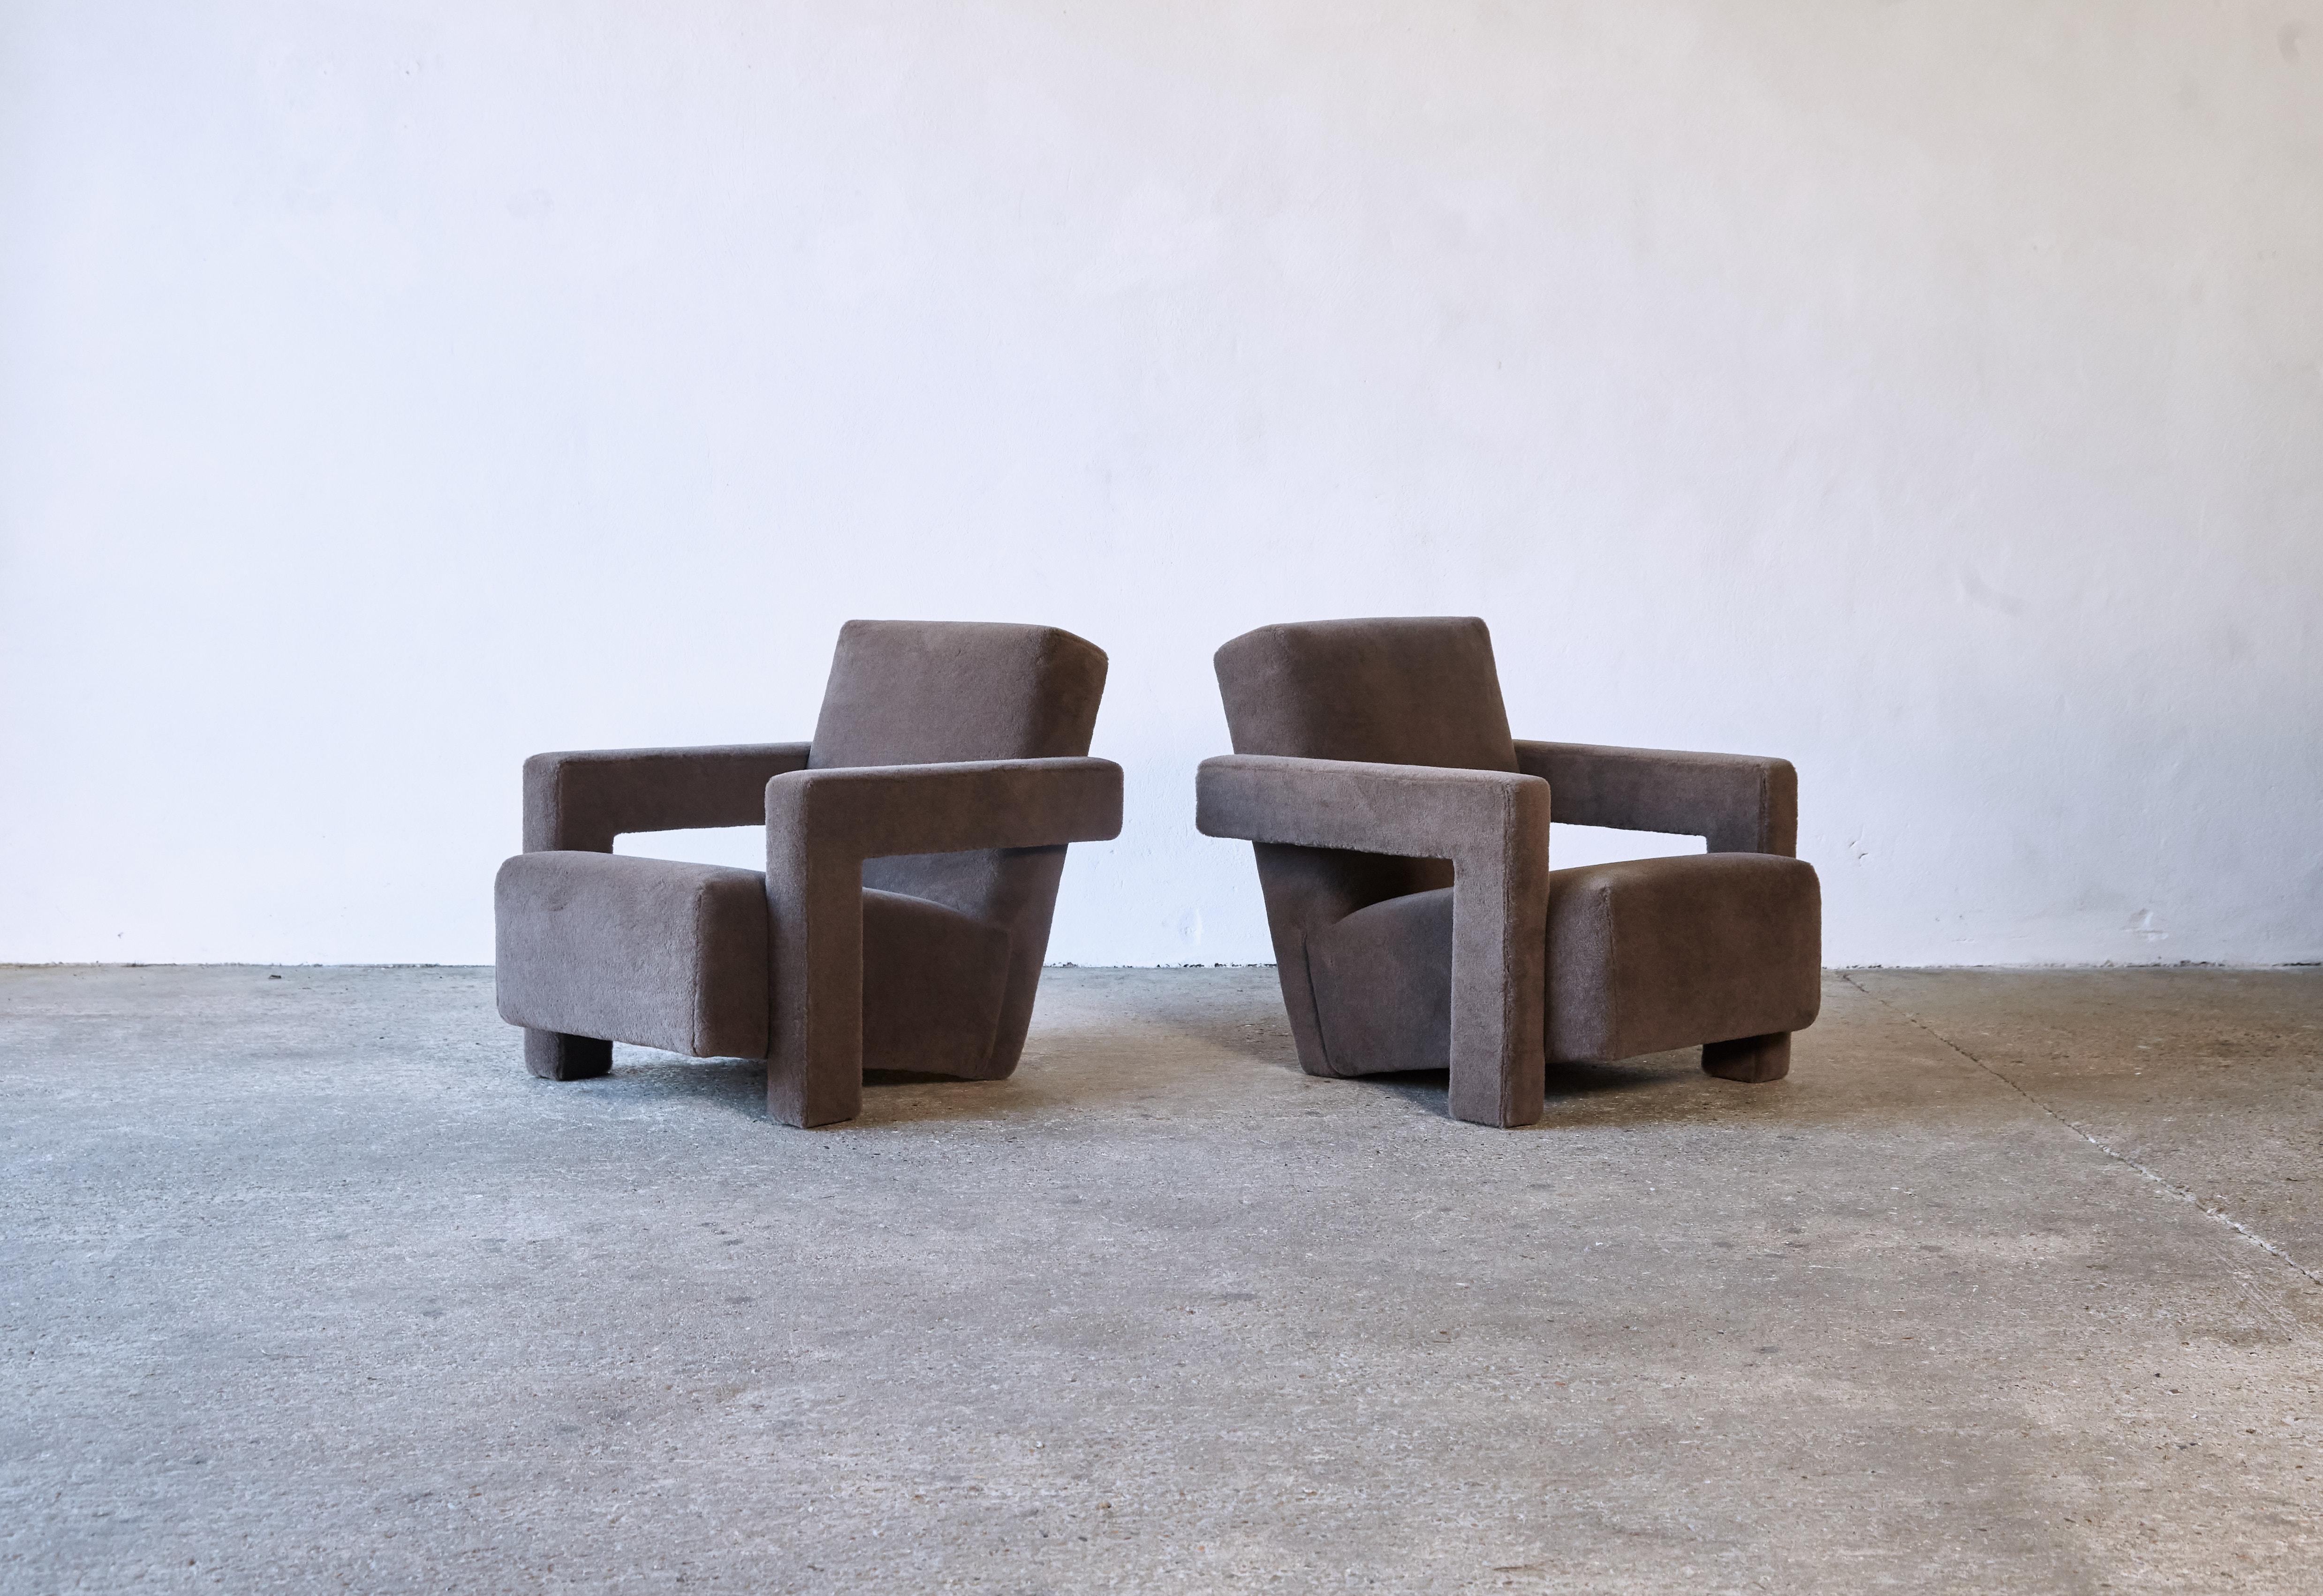 A pair of Gerrit Rietveld Utrecht armchairs, produced by Cassina, and newly upholstered in a brown / grey thick, soft, luxurious 100% alpaca pile fabric. Cassina labels to the underneath. Priced and sold as a pair together. Fast shipping worldwide -